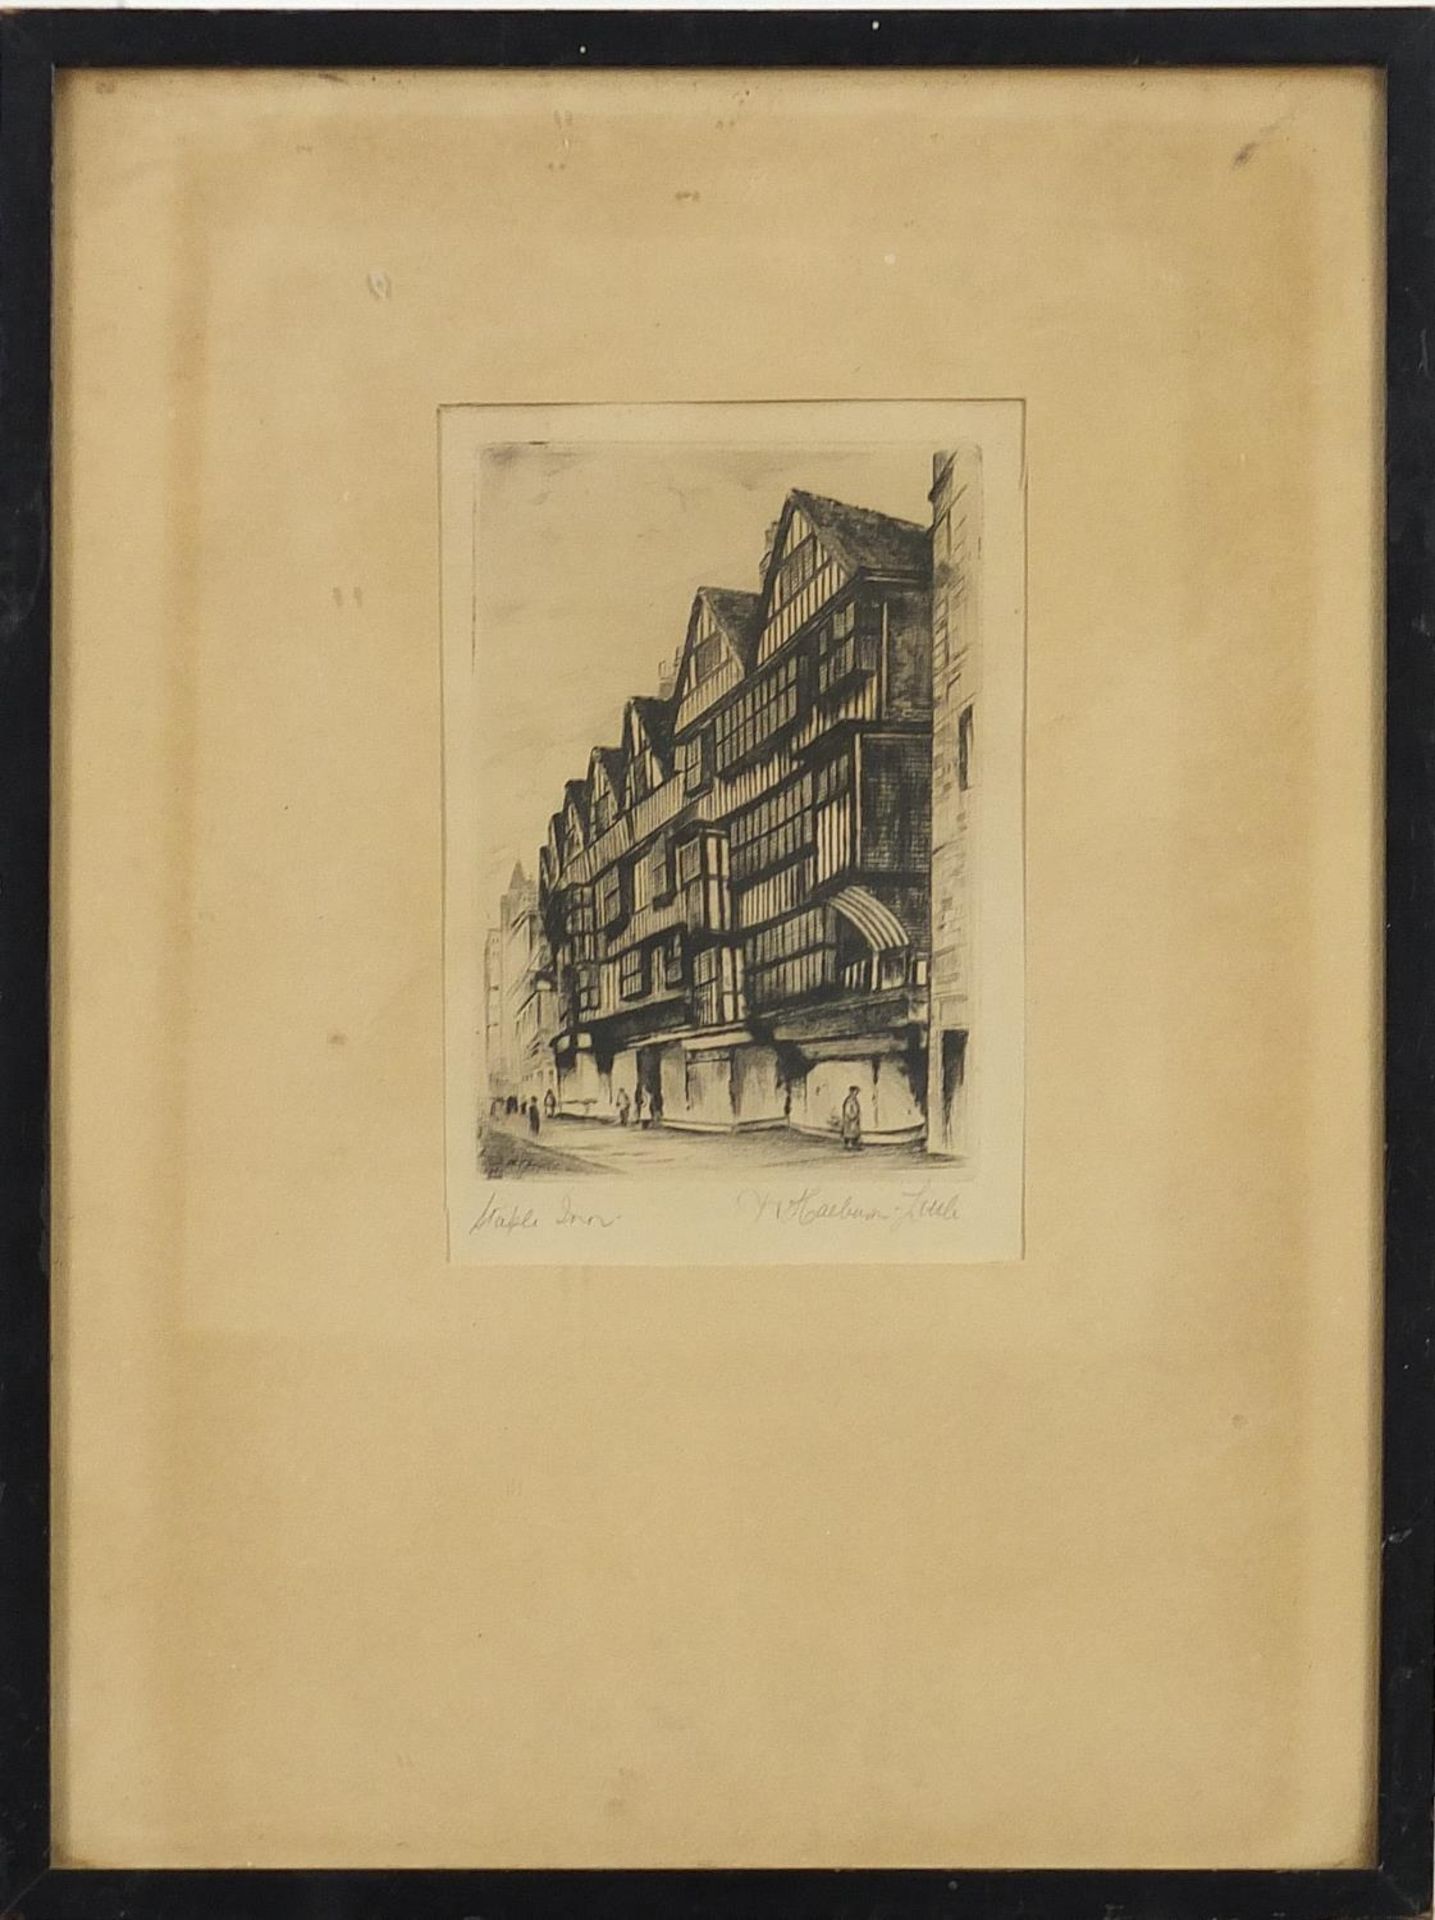 W Haeburn Little - Stable Inn, pencil signed etching, mounted, framed and glazed, 14.5cm x 10cm - Image 2 of 6